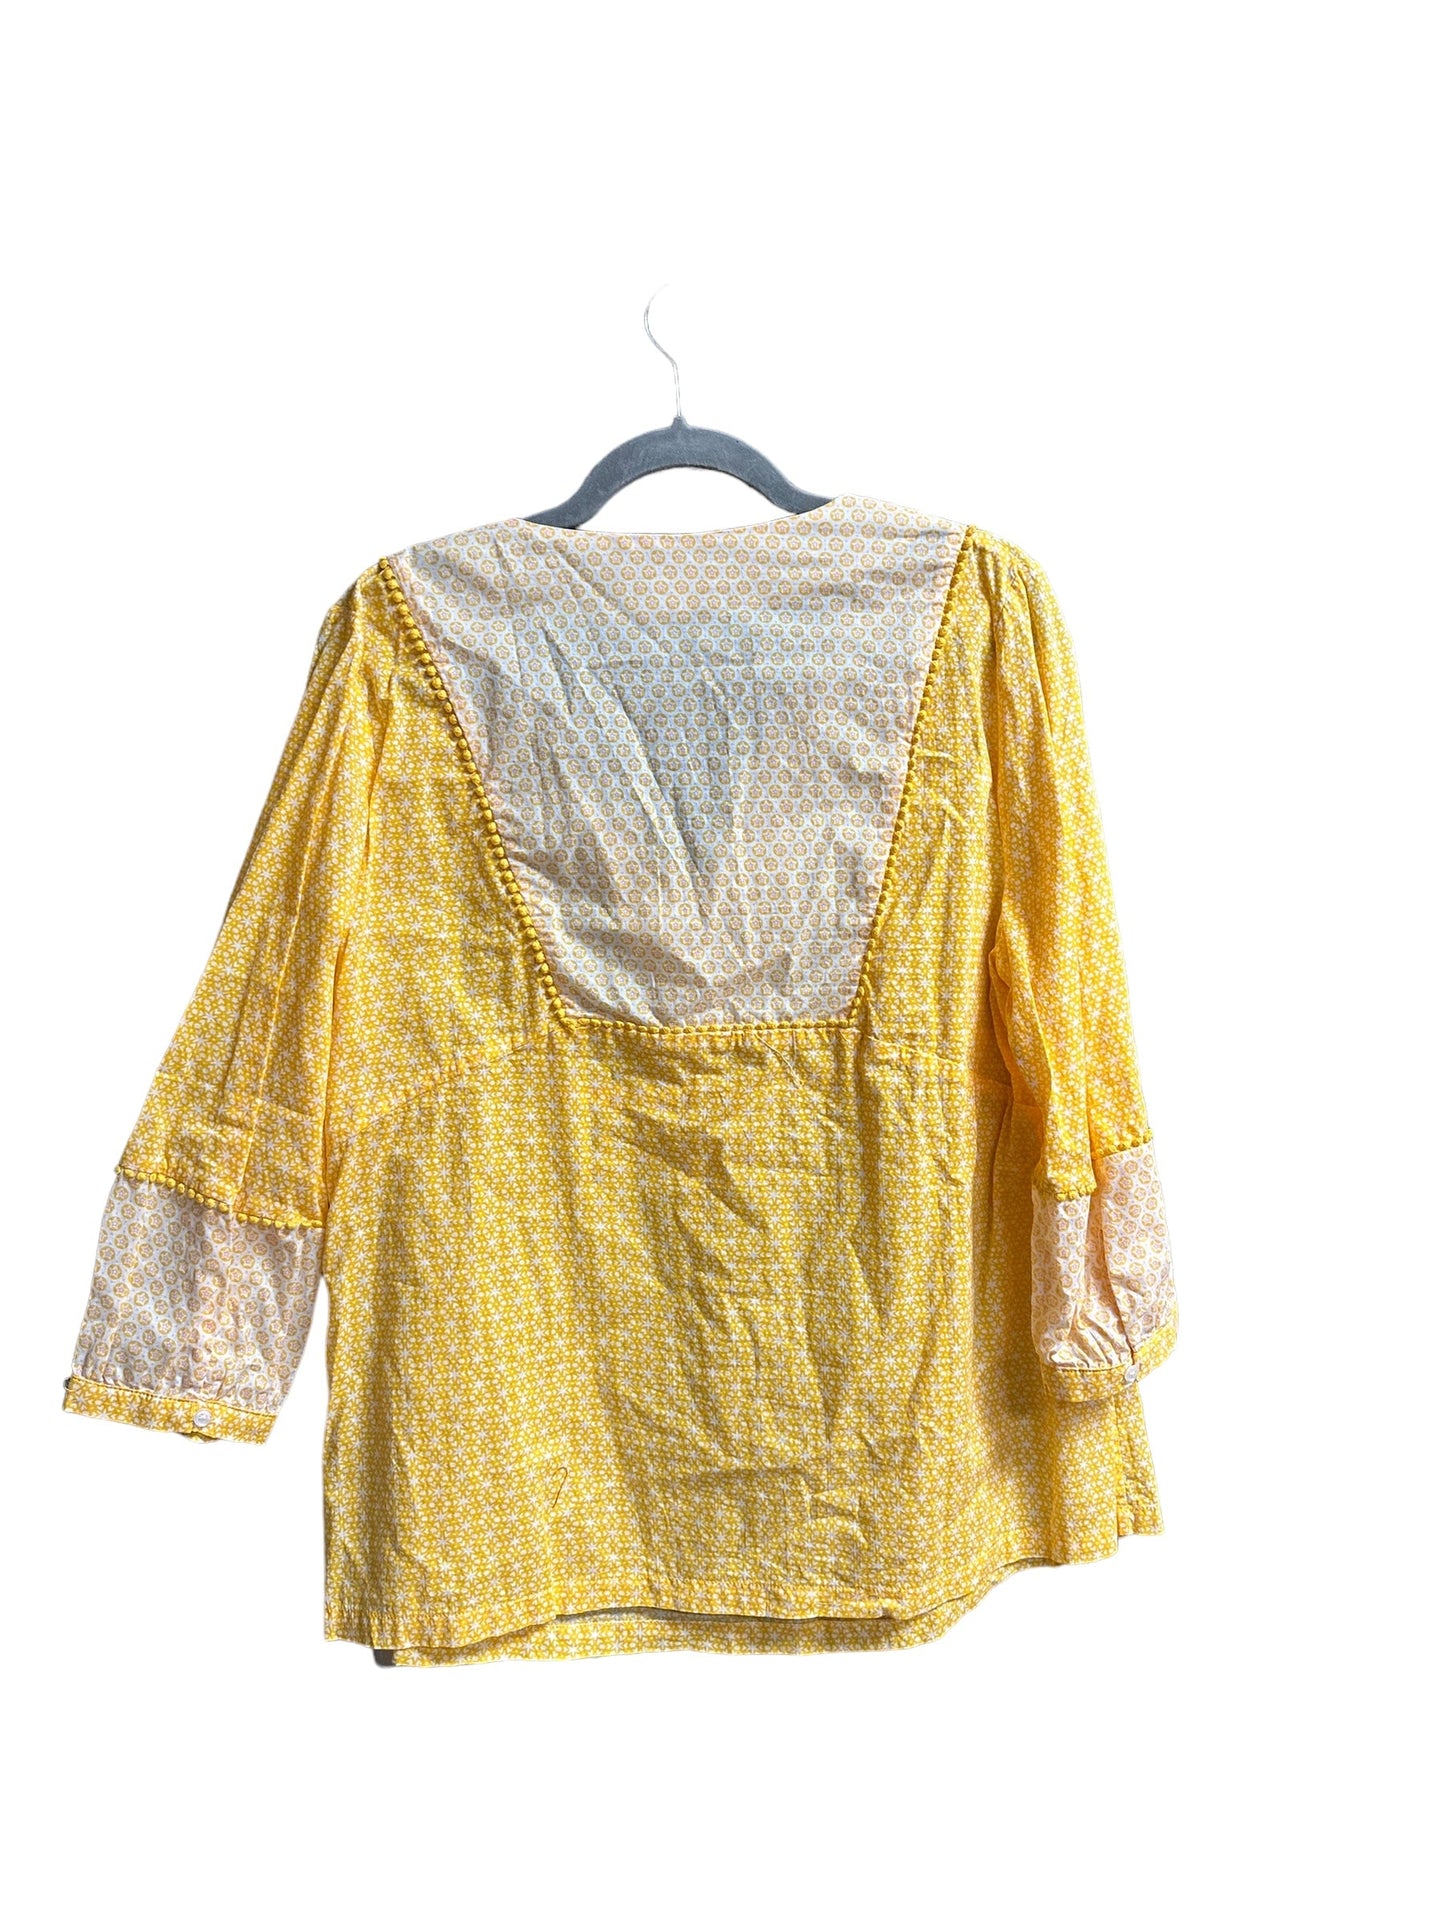 Yellow Top 3/4 Sleeve Boden, Size L